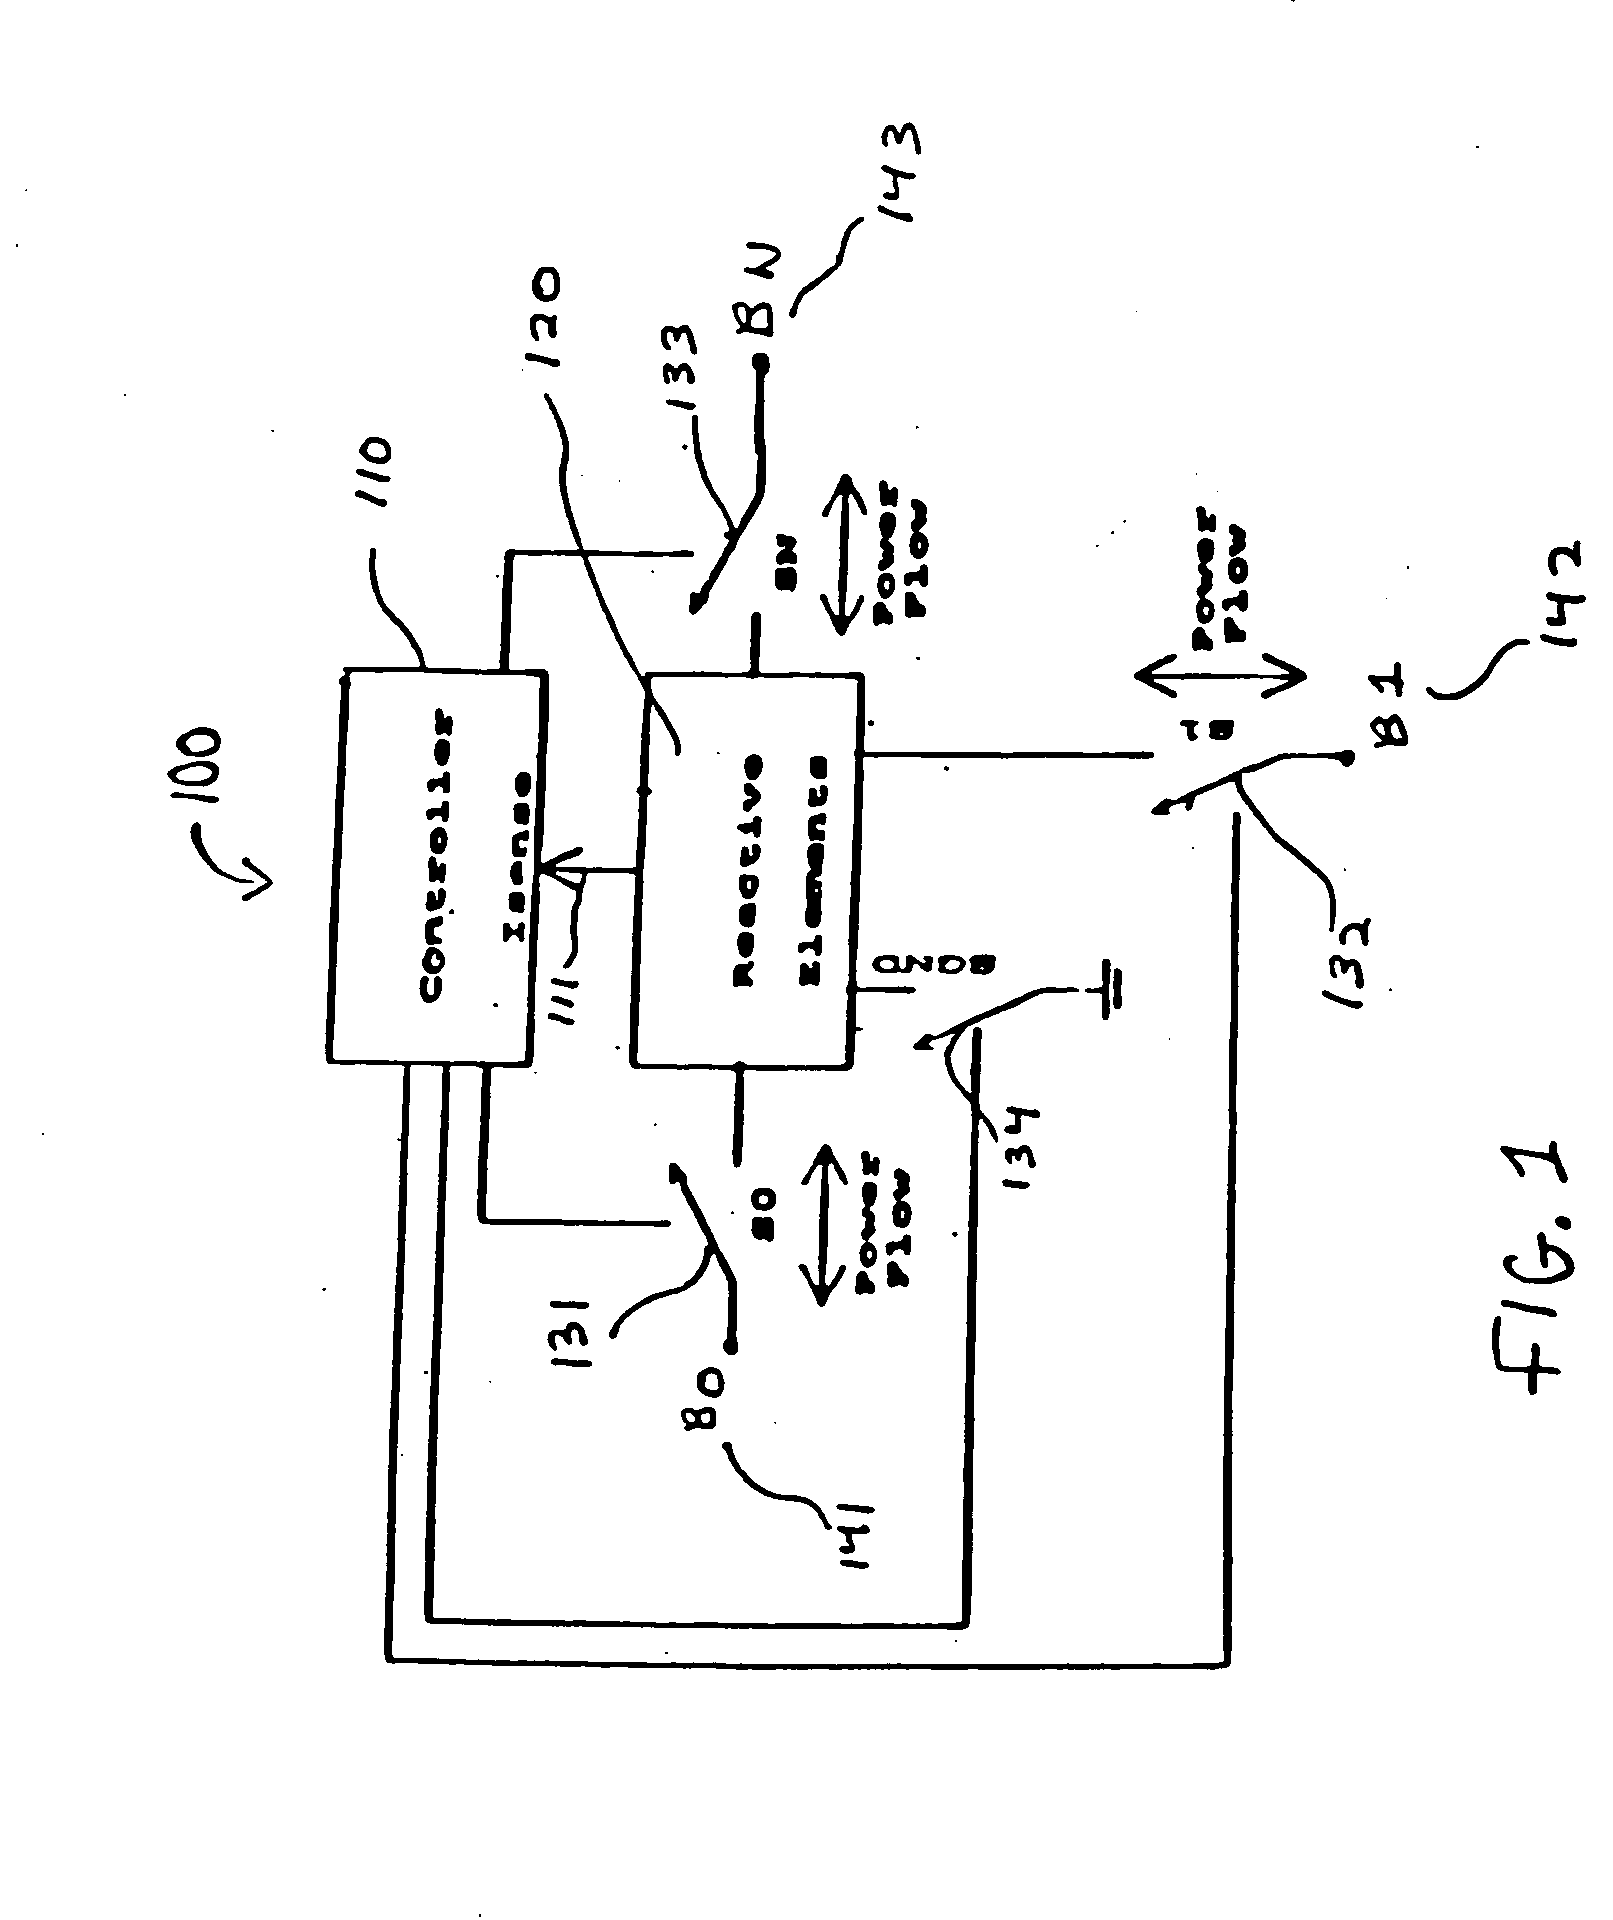 Bidirectional power conversion with multiple control loops